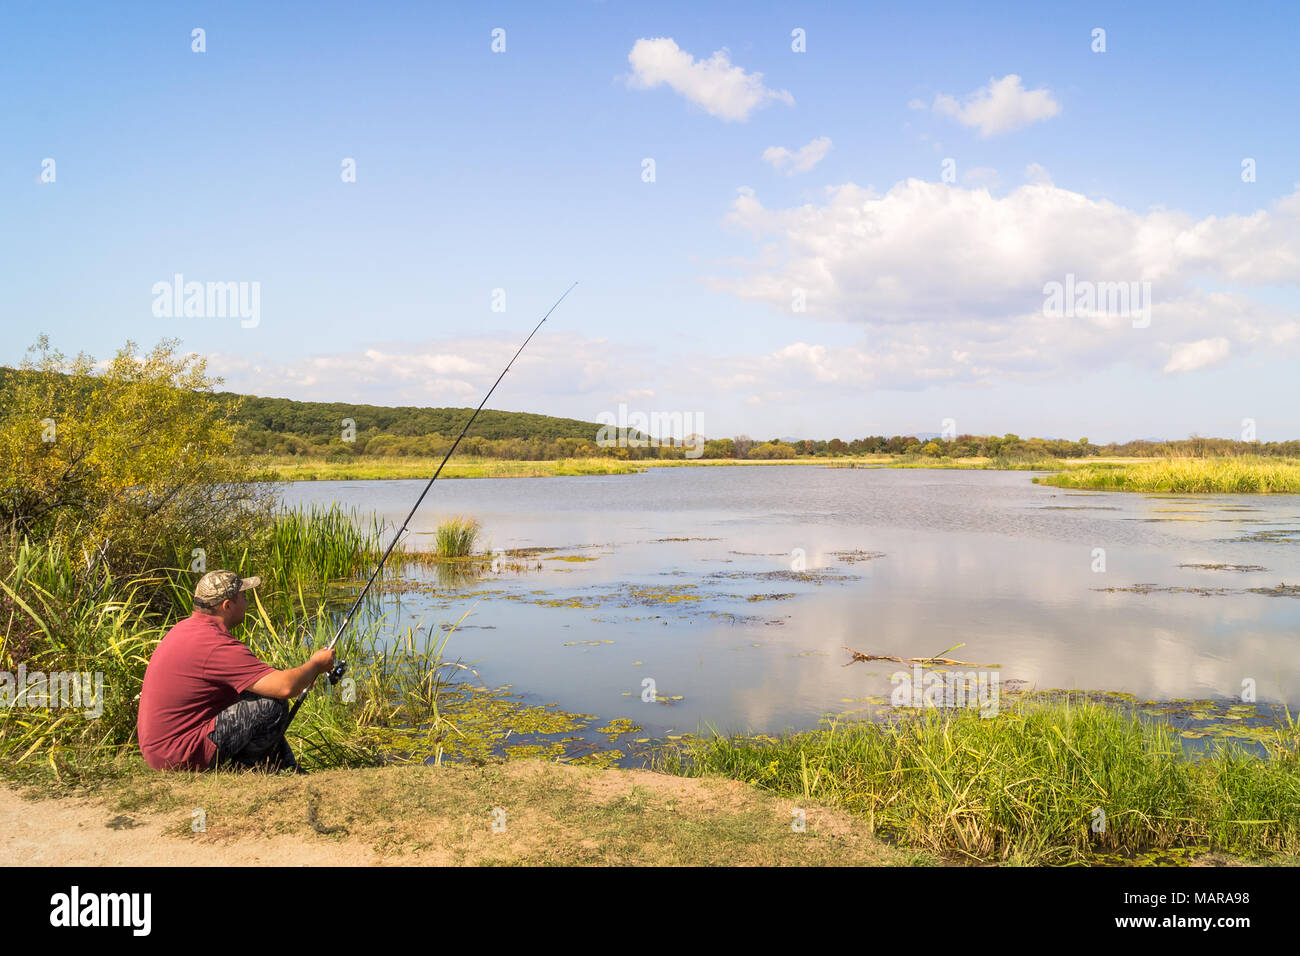 Fisherman on the shore of the lake. Fishing adventure against the